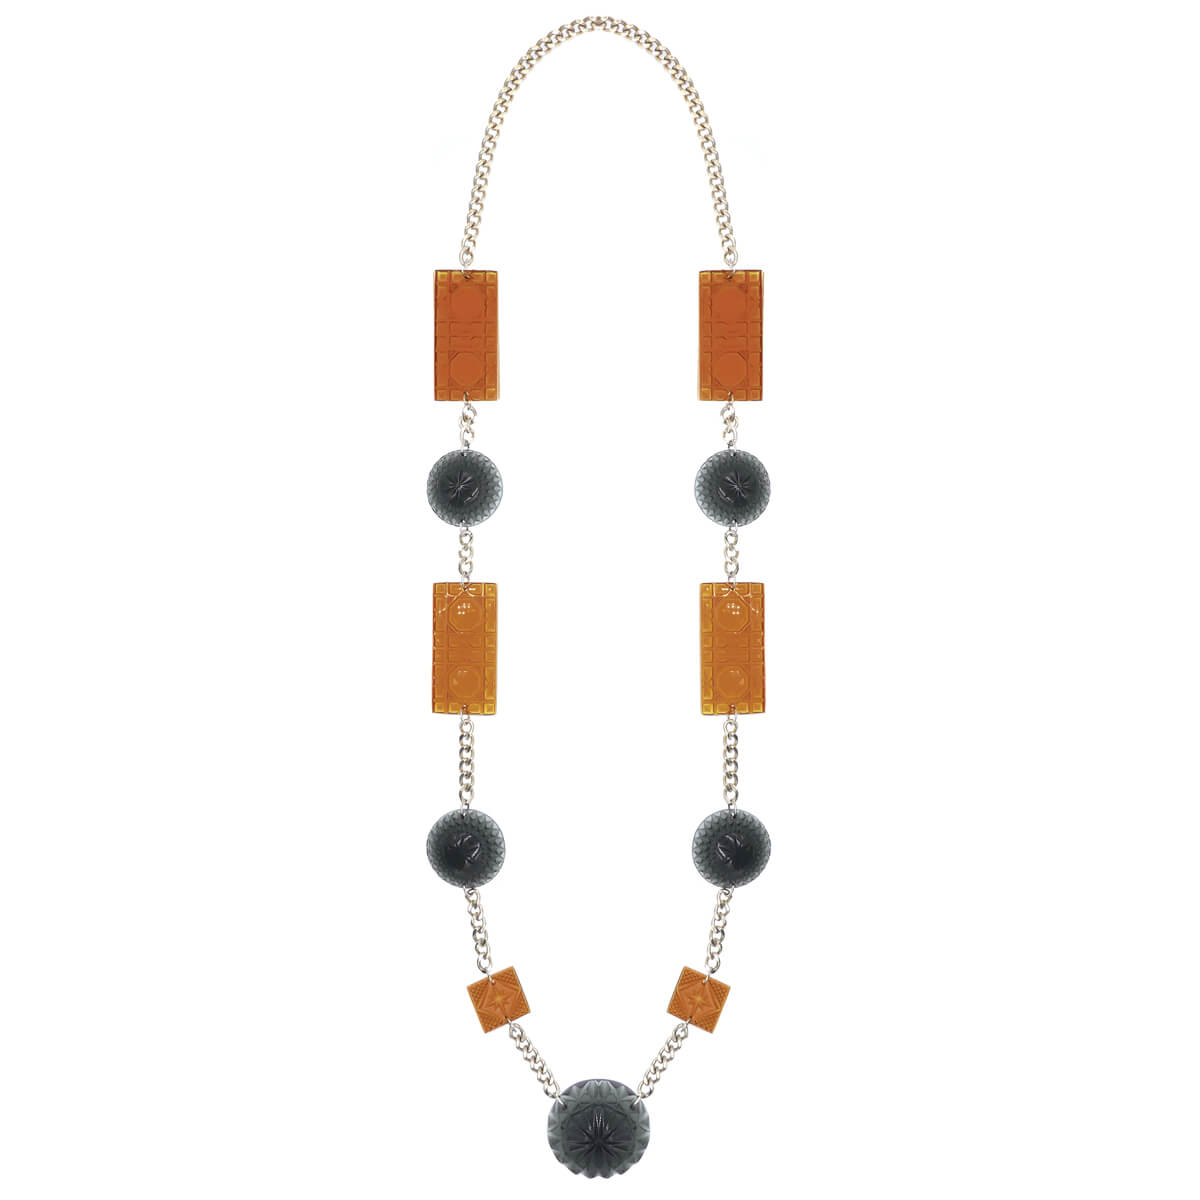 SAMPLE SALE Extra Long Square & Disc Necklace Amber & Black